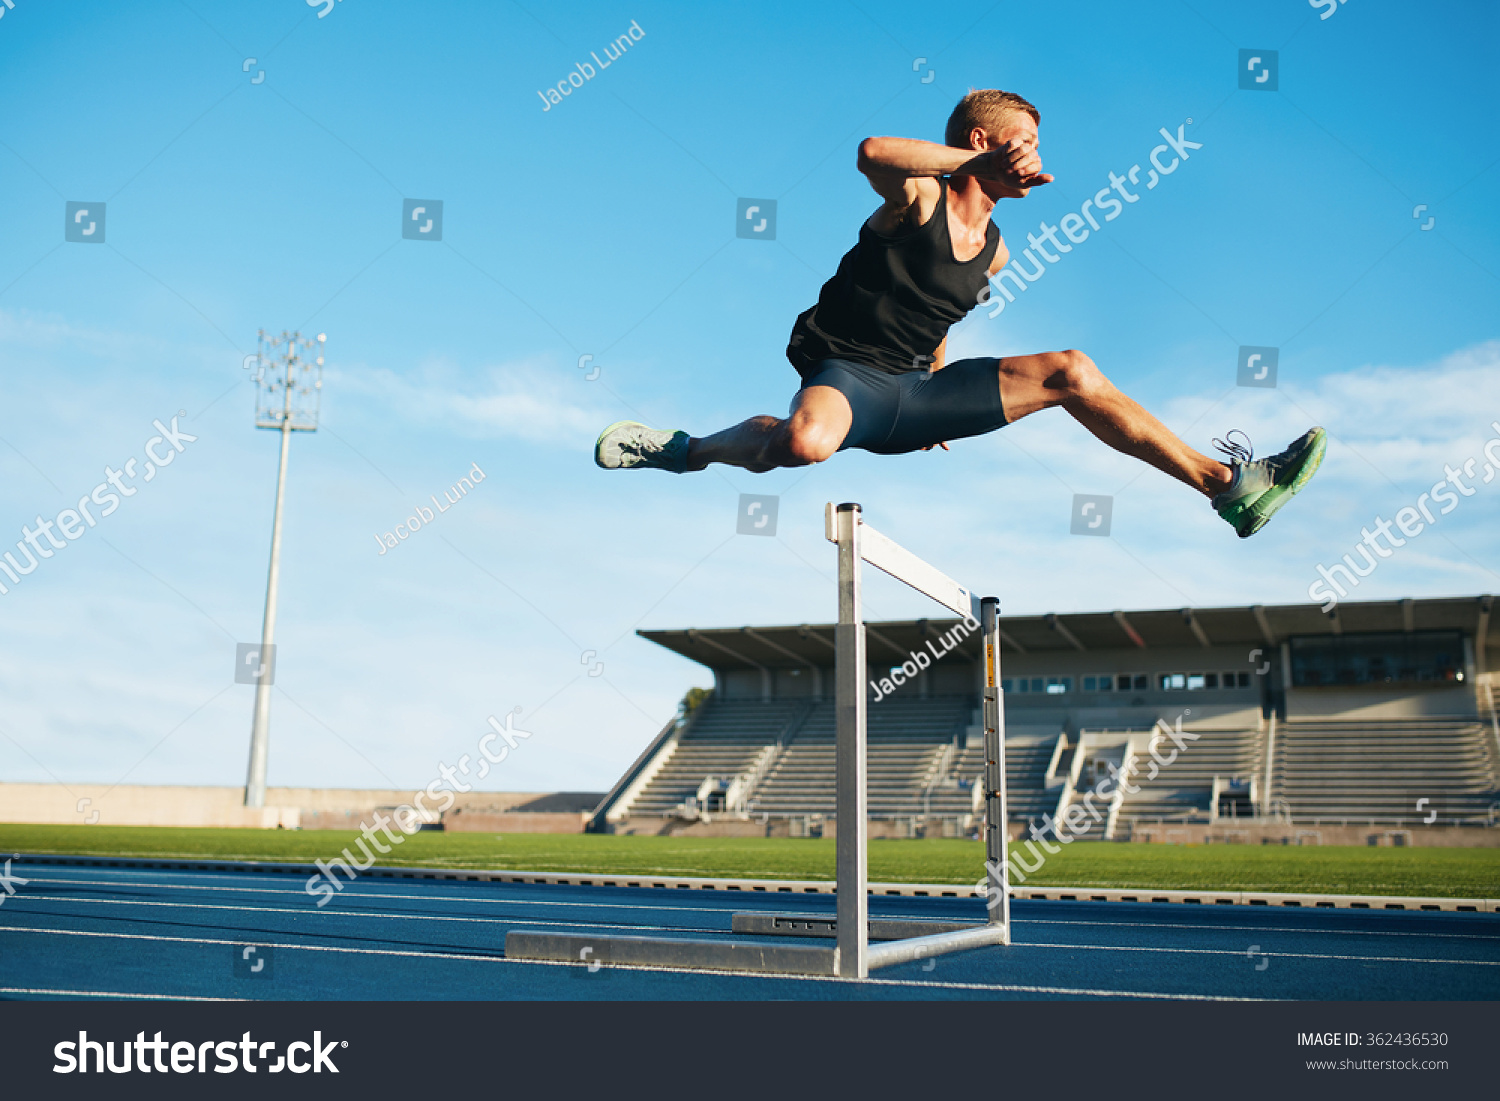 Professional male track and field athlete during obstacle race. Young athlete jumping over a hurdle during training on racetrack in athletics stadium. #362436530